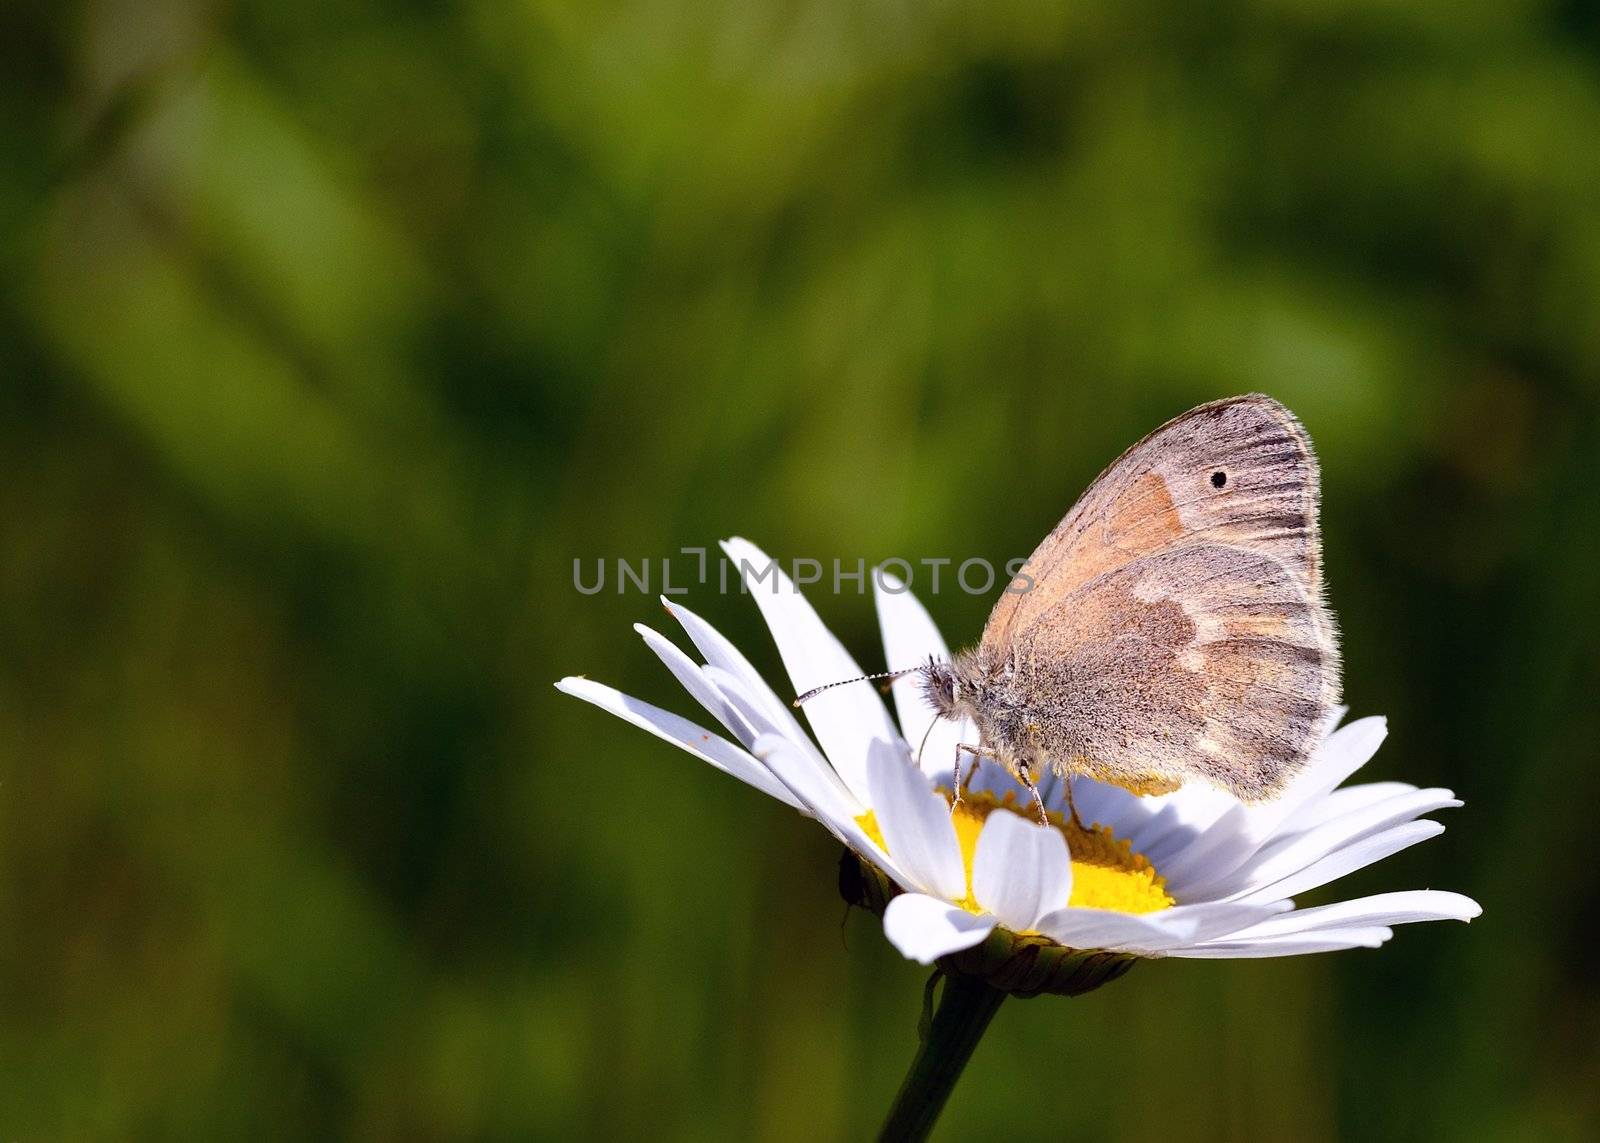 Common Ringlet Butterfly perched on a flower collecting pollen.